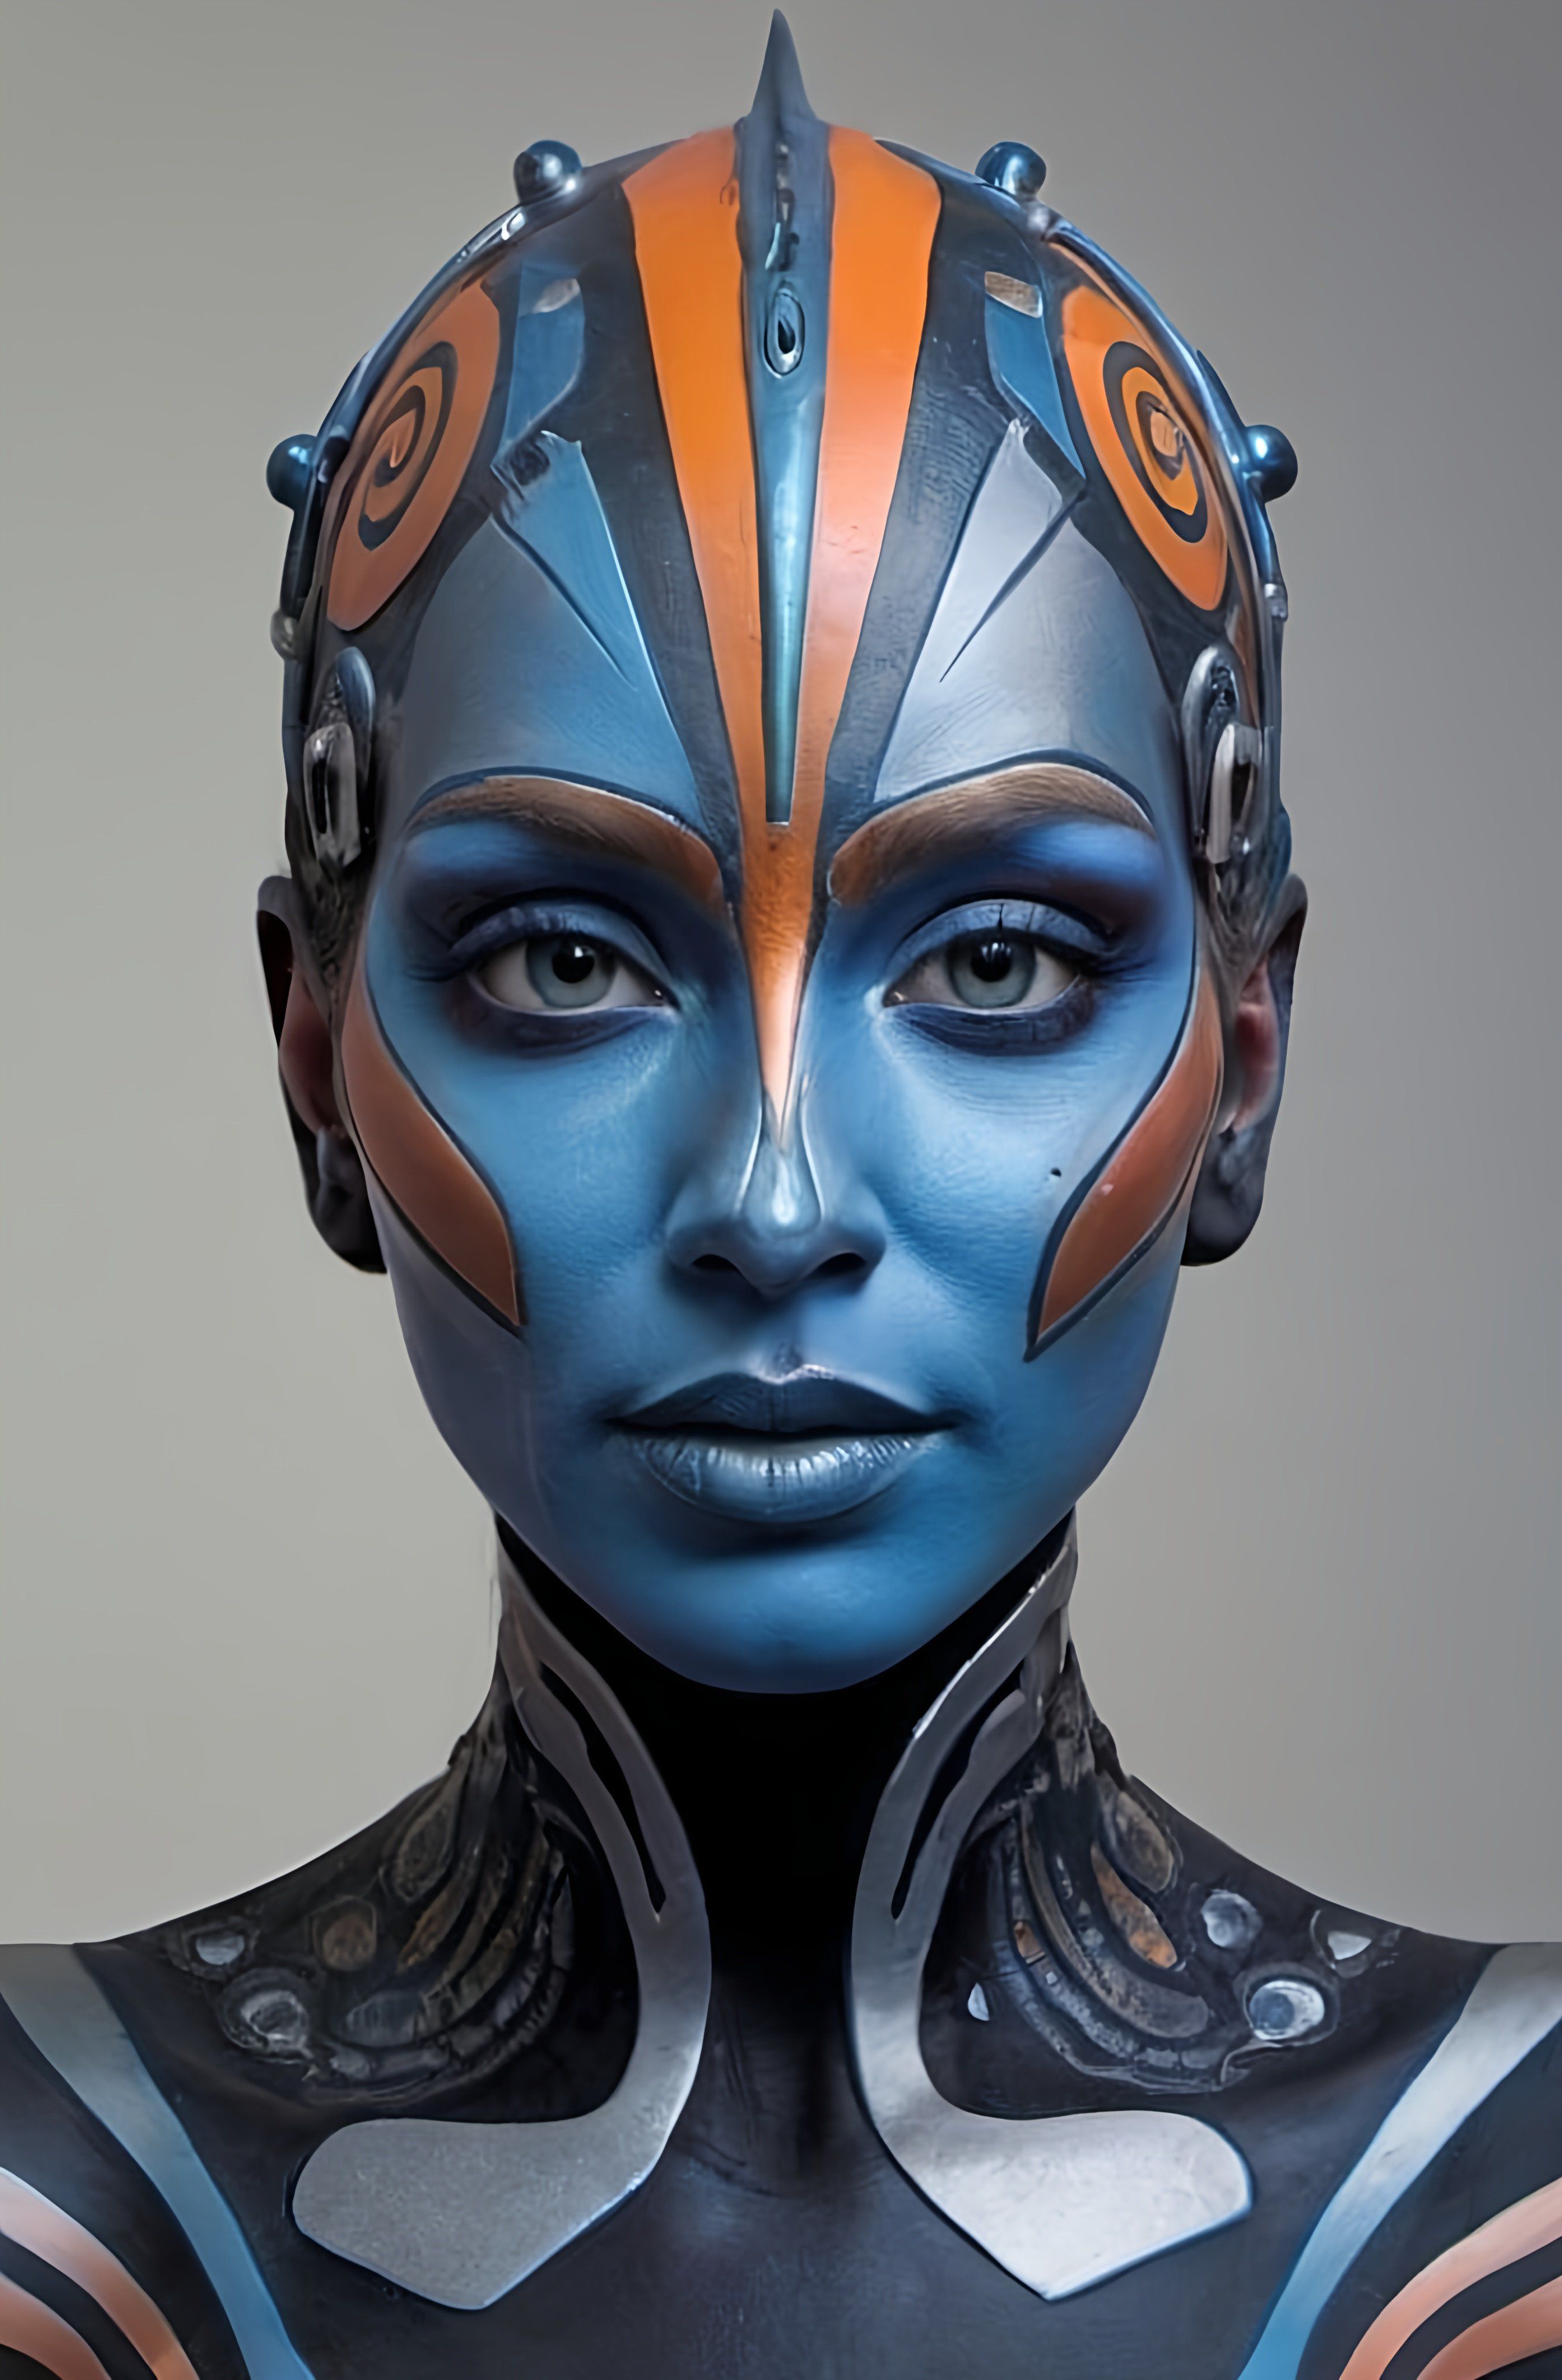 Prompt: a woman with blue and orange makeup and a futuristic look on her face and body, with a futuristic design on her face, figurative art